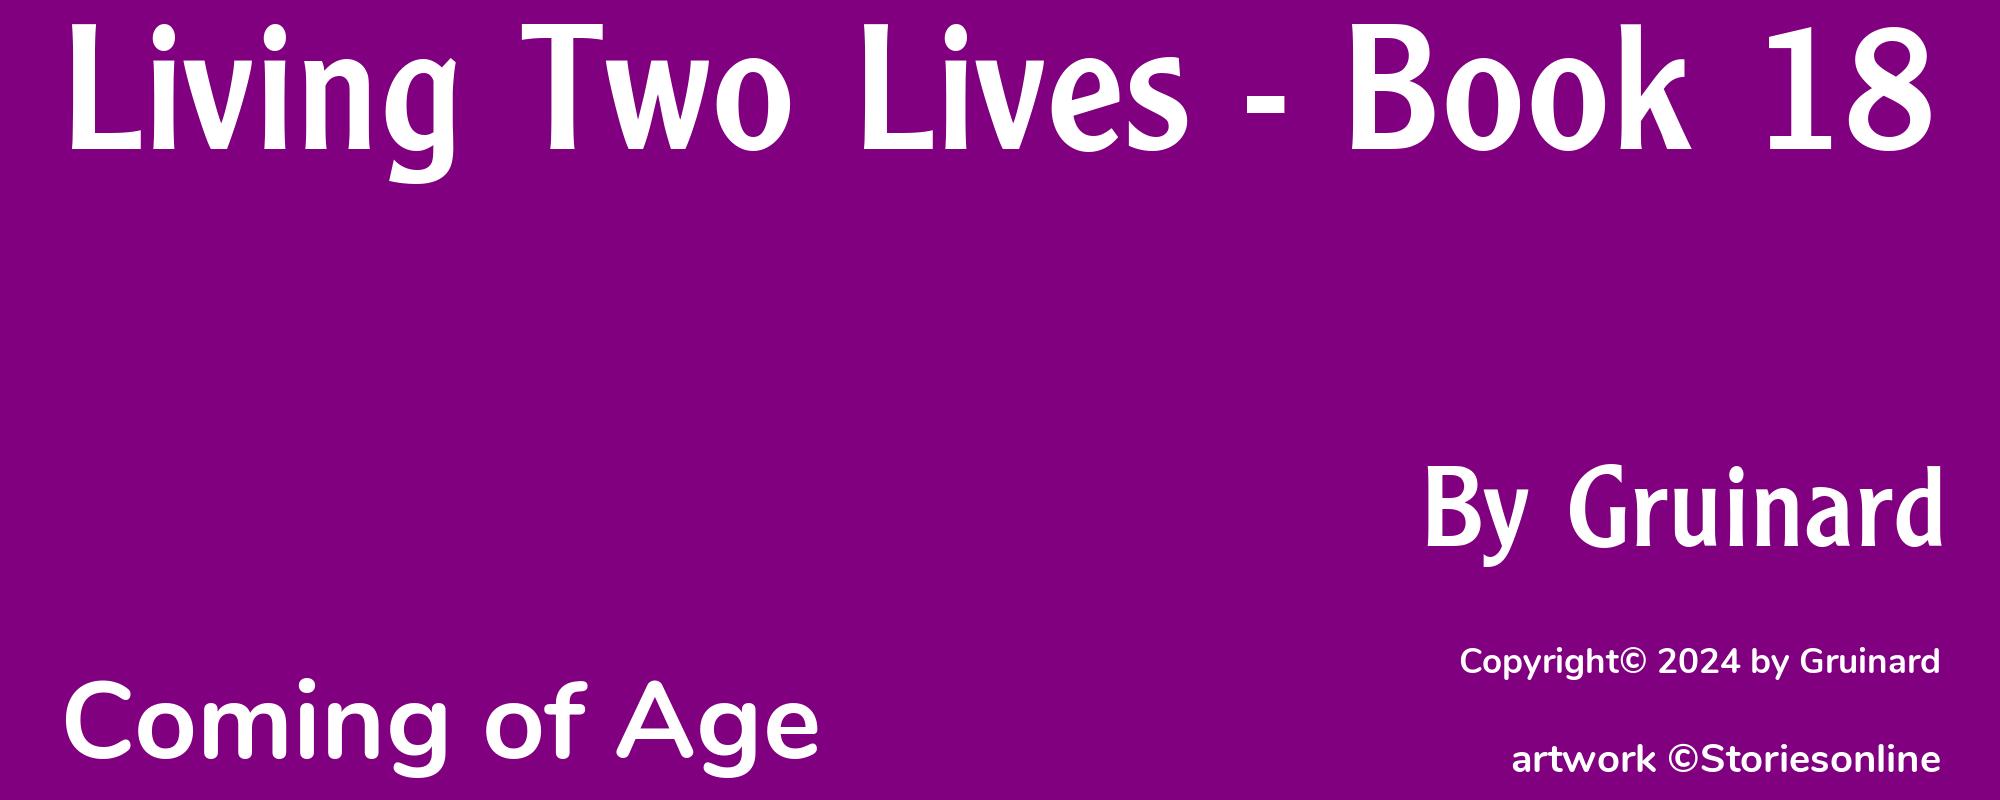 Living Two Lives - Book 18 - Cover